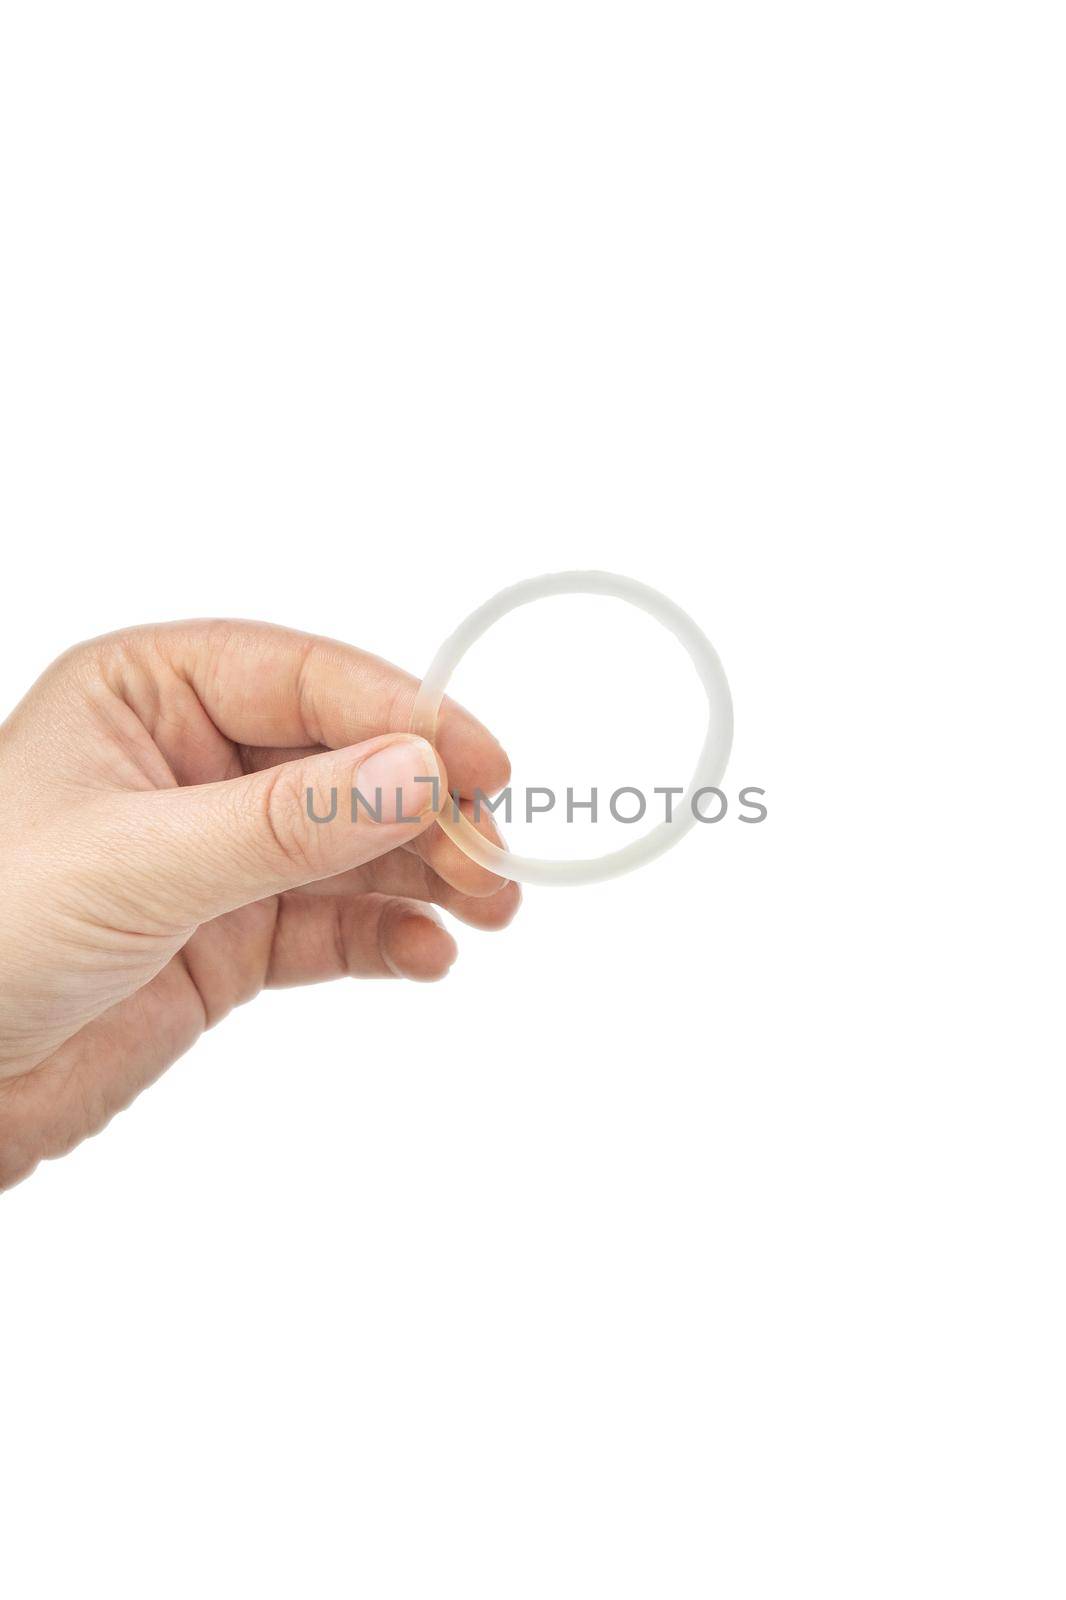 Birth control ,hormone, contraception ring in a womans hand isolated on white background, vaginal ring for contraceptive use with copy space closeup